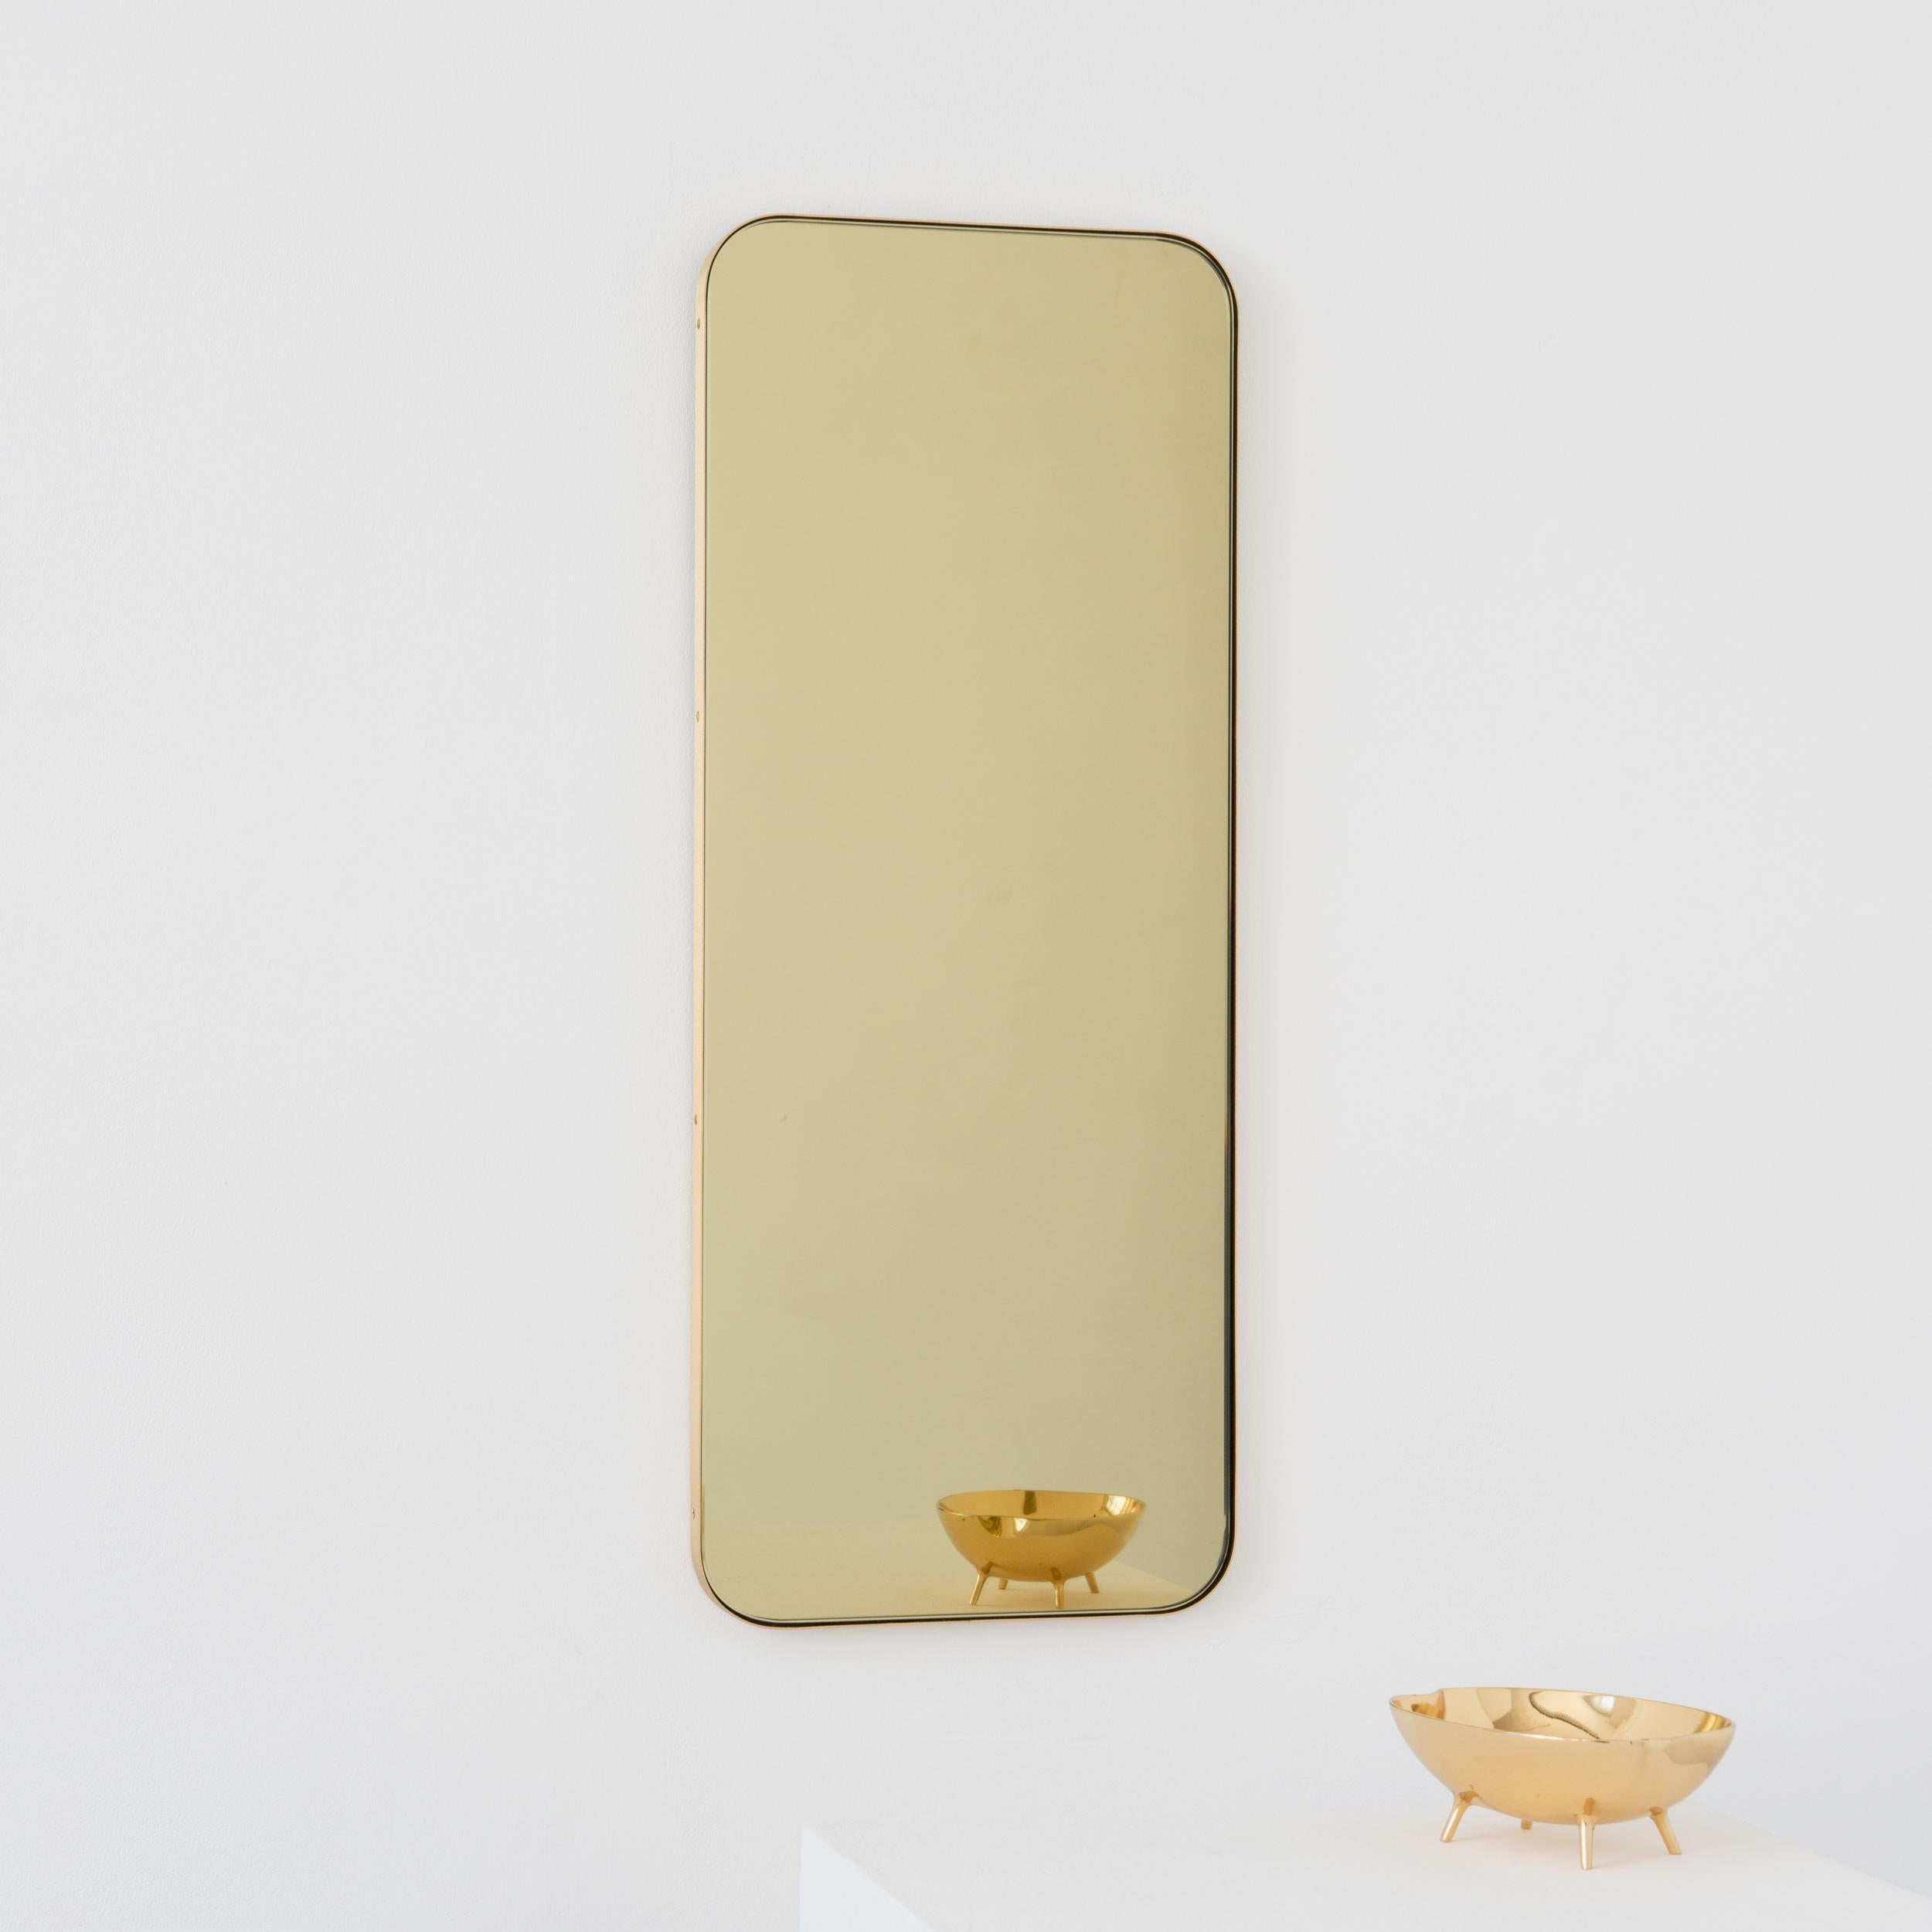 Modern gold tinted rectangular mirror with an elegant solid brushed brass frame. Part of the charming Quadris collection, designed and handcrafted in London, UK. 

Medium, large and extra-large (37cm x 56cm, 46cm x 71cm and 48cm x 97cm) mirrors are